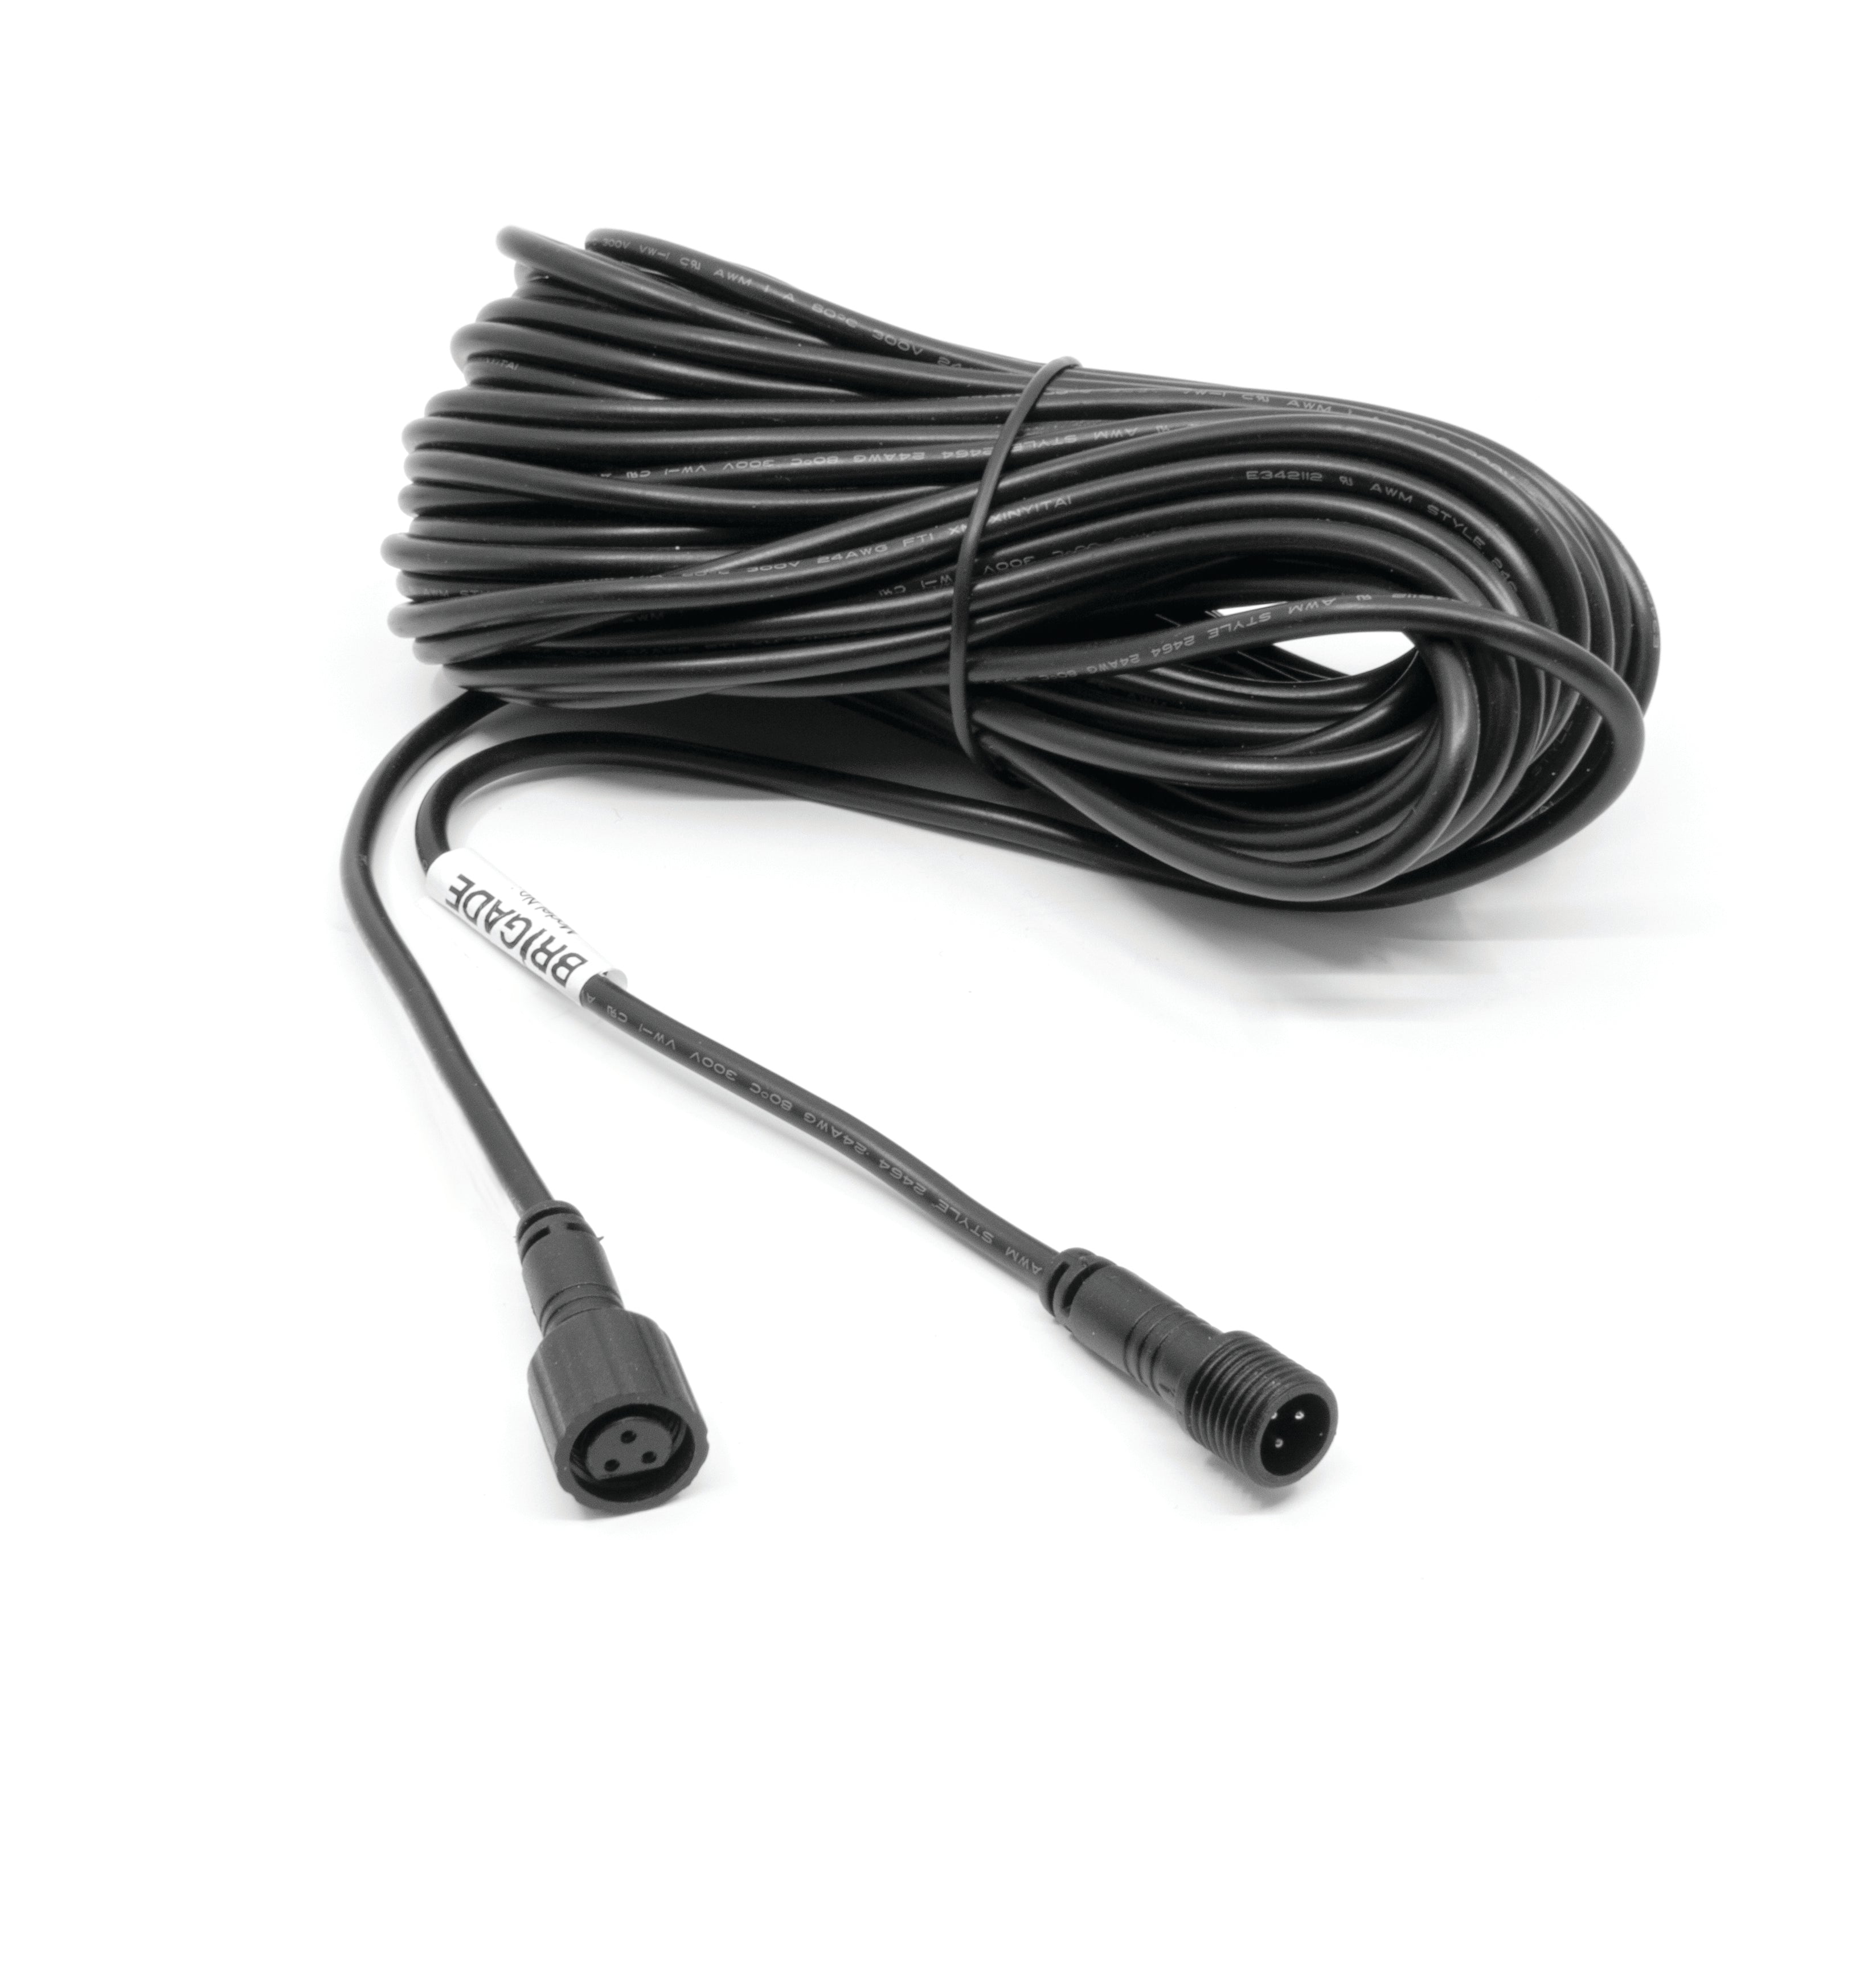 Buzzer/Display extension cable 2.5 metre for Ultrasonic detection systems